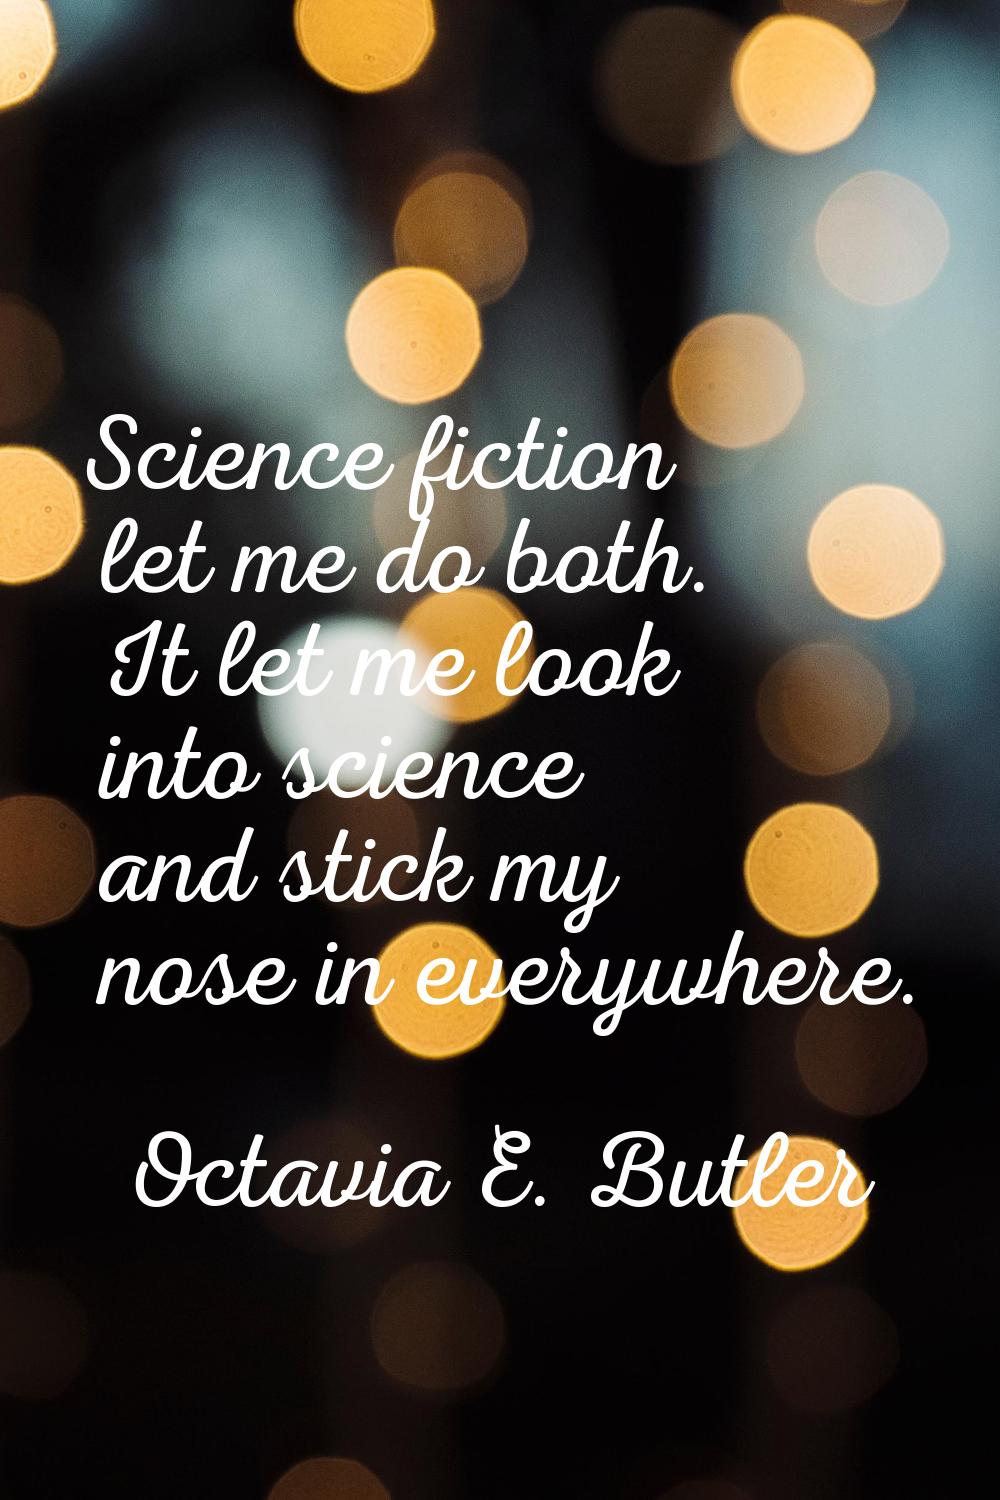 Science fiction let me do both. It let me look into science and stick my nose in everywhere.